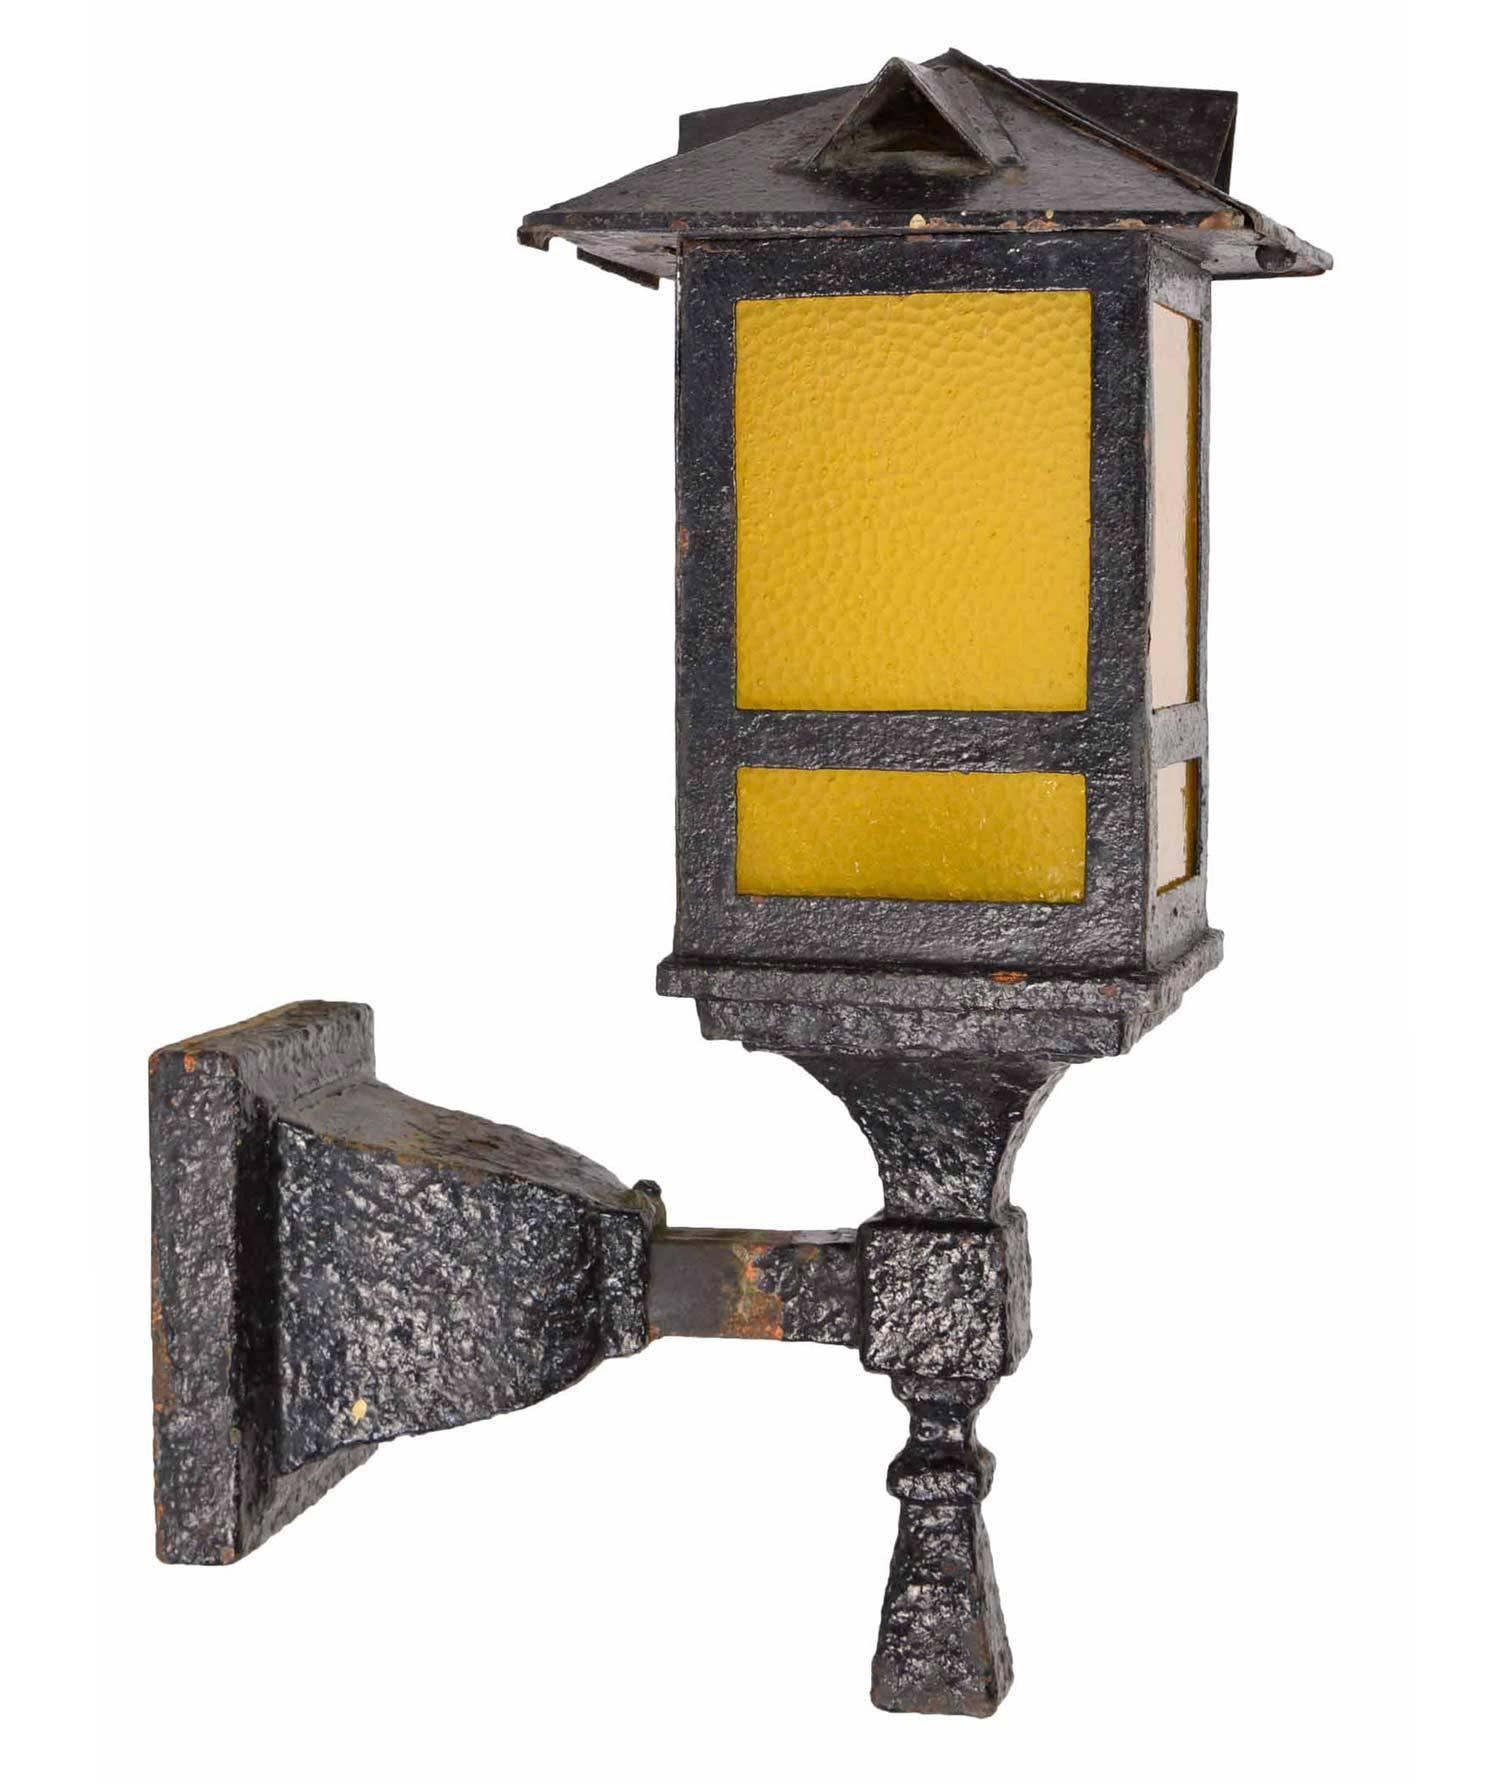 A great pair of 1920s Arts & Crafts-style exterior sconces that are made of heavy gauge cast iron. The original finish with several layers of glossy black paint with its crusty perfection adds to the fixture's charm! The top is smartly vented and